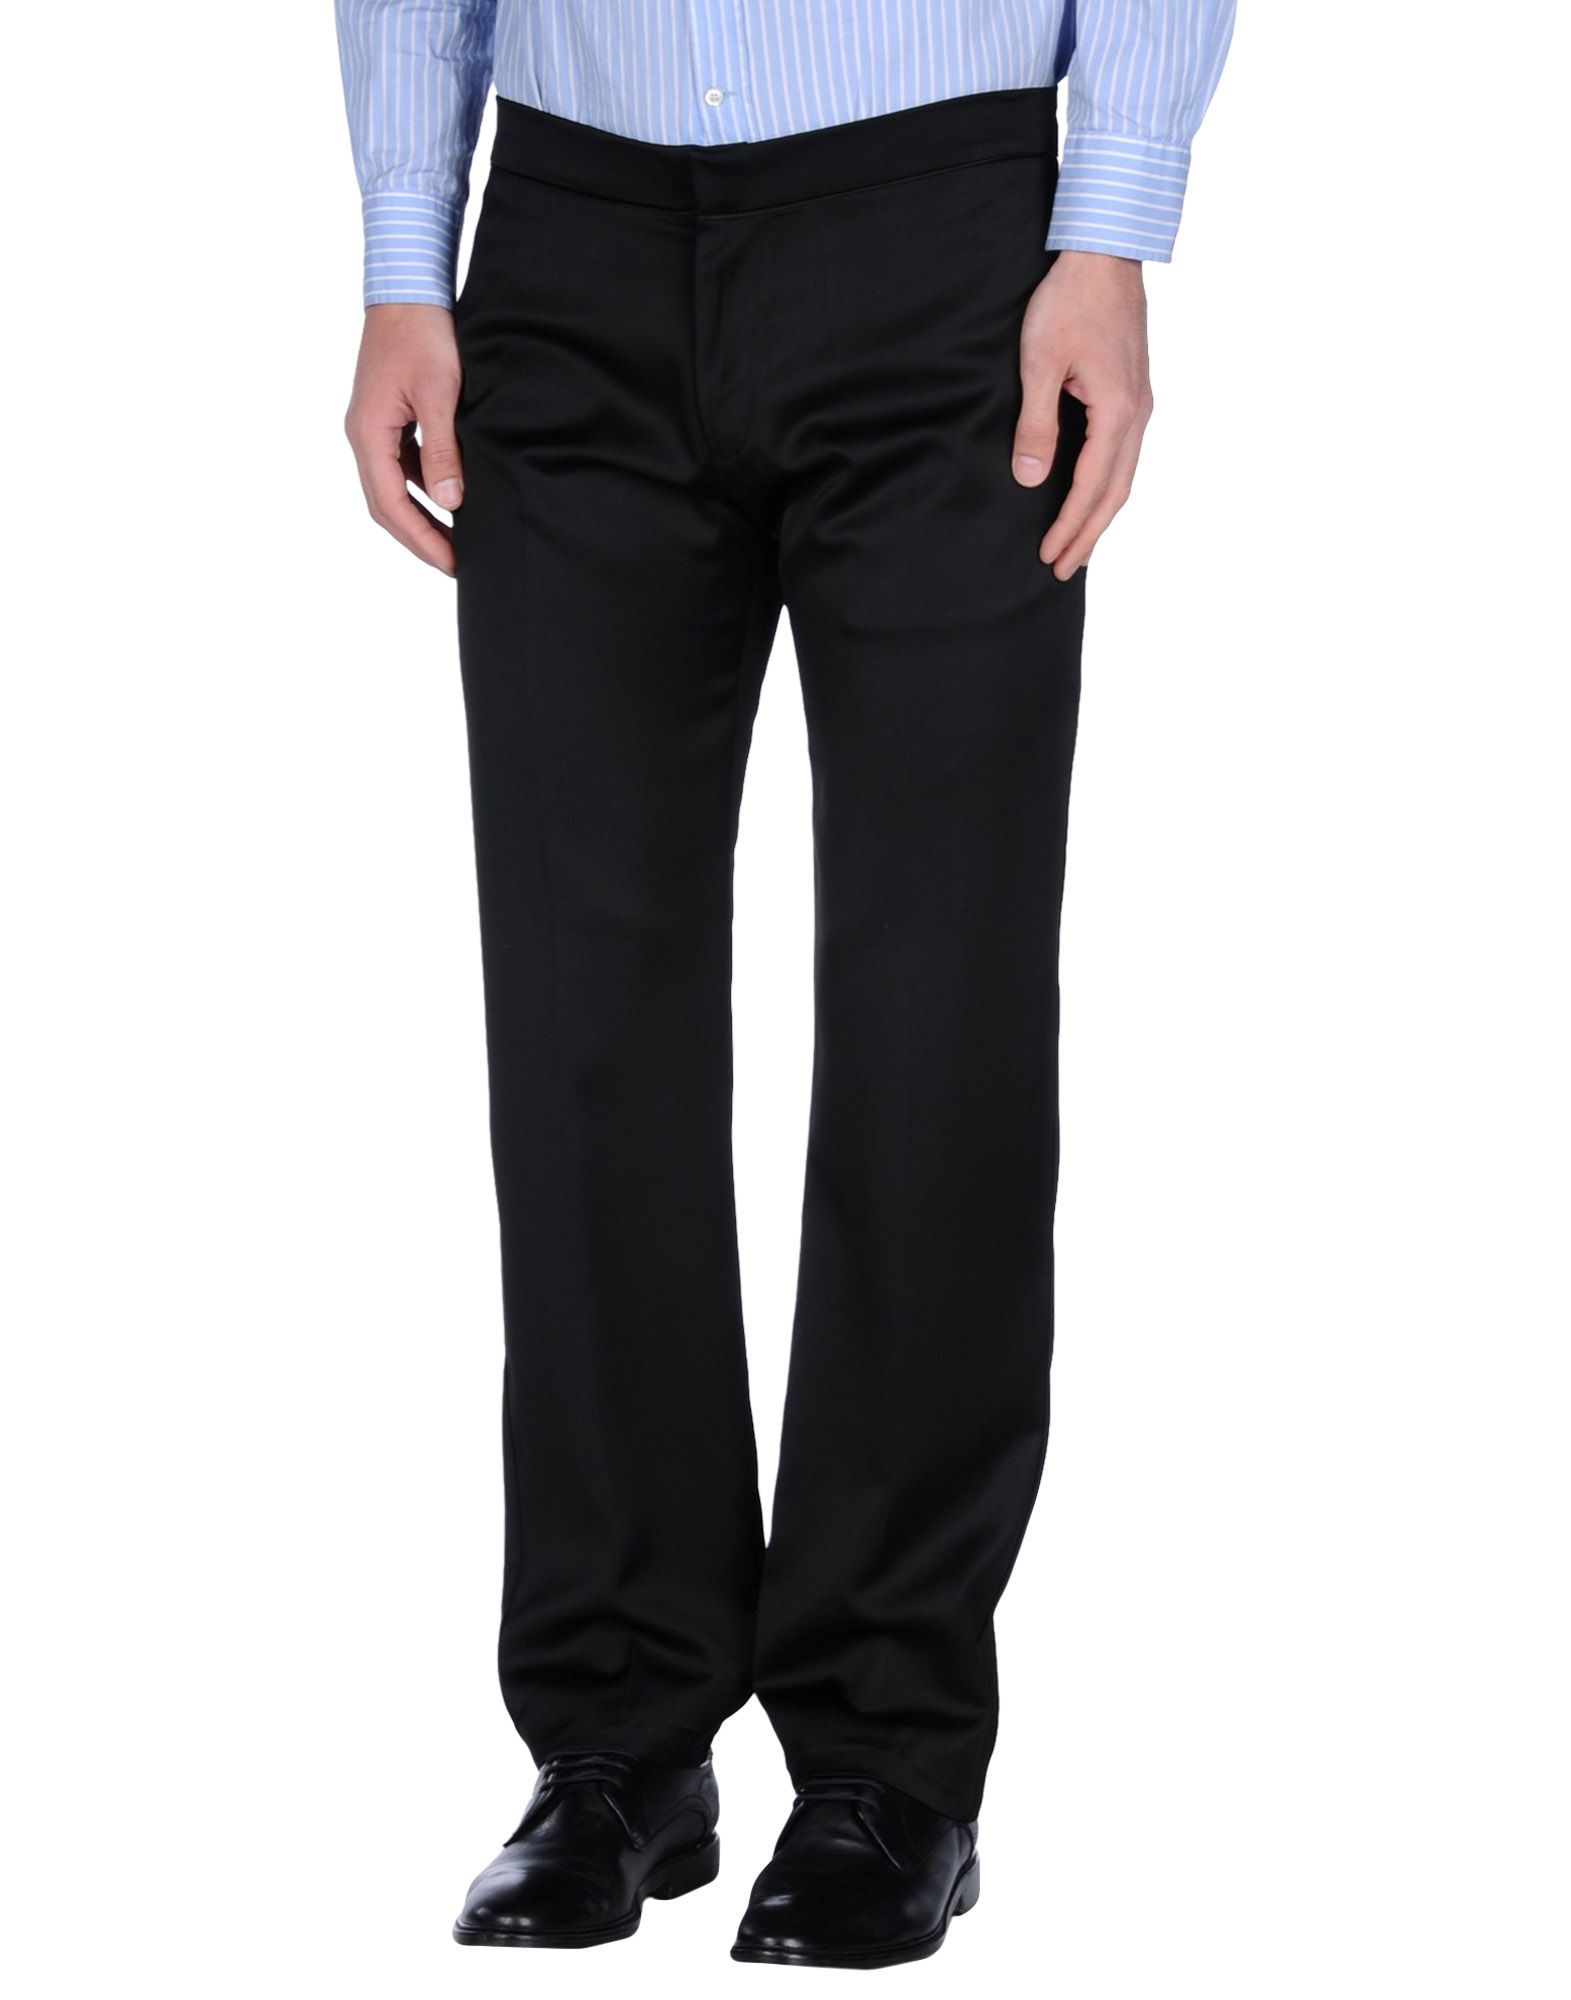 Lyst - Versace Jeans Casual Trouser in Black for Men